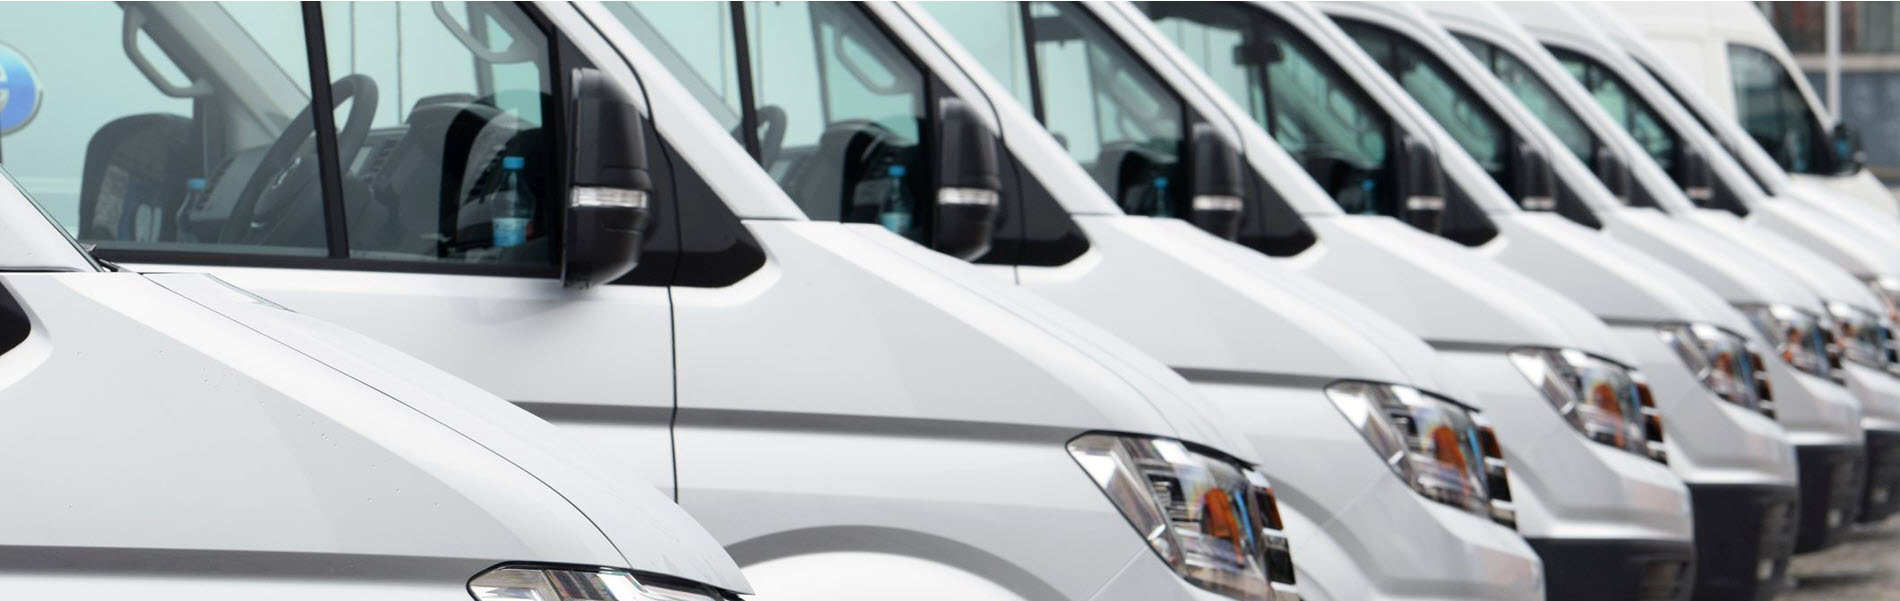 What Is A Fleet Vehicle?